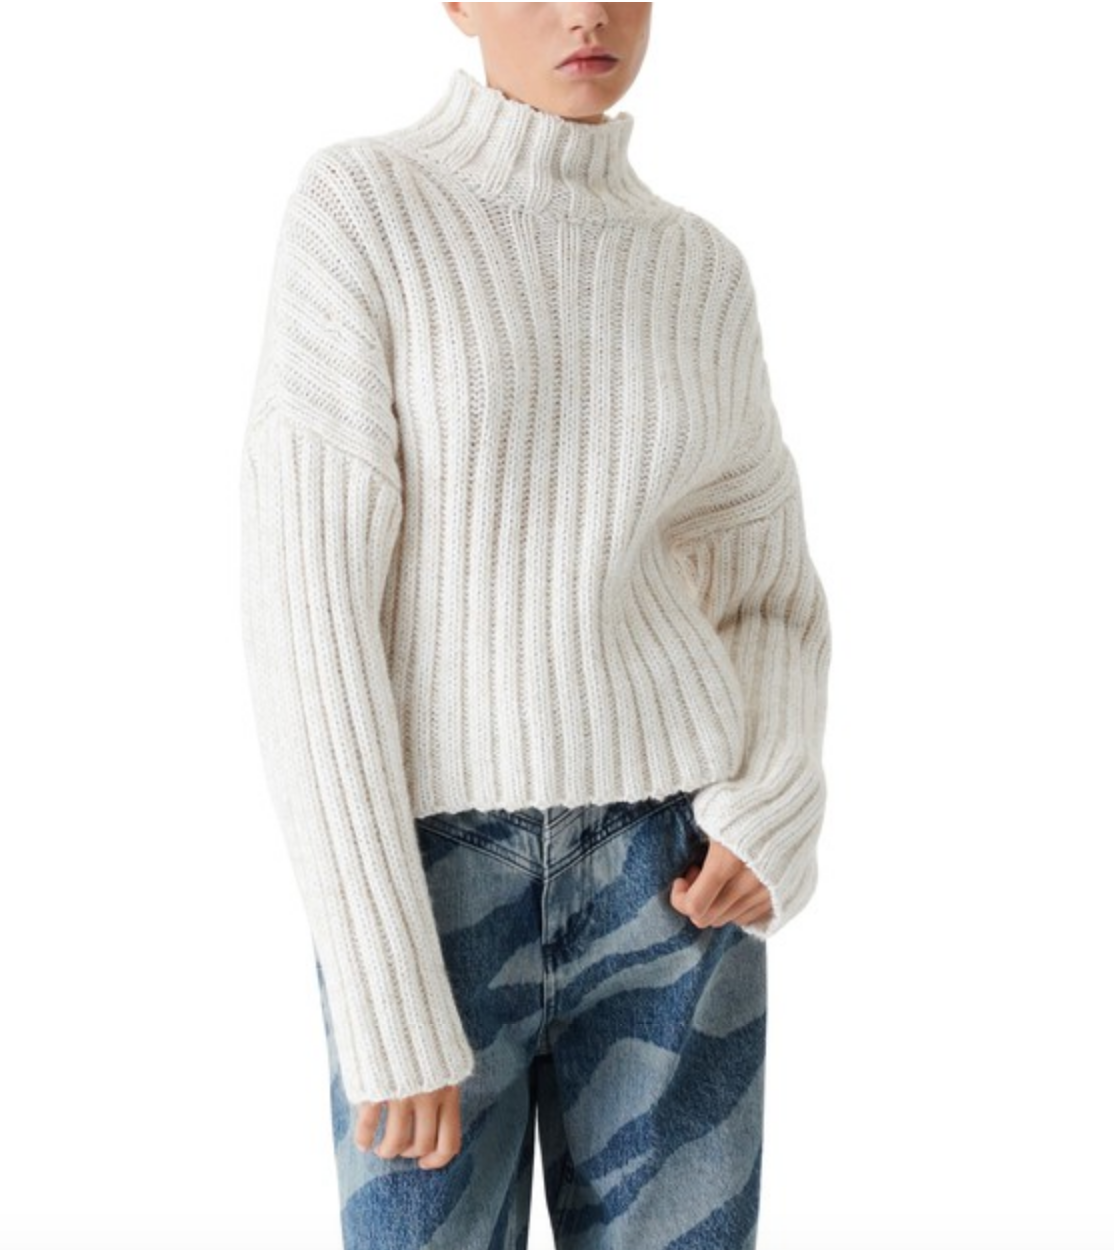 Erin Lichy's White Cable Knit Sweater